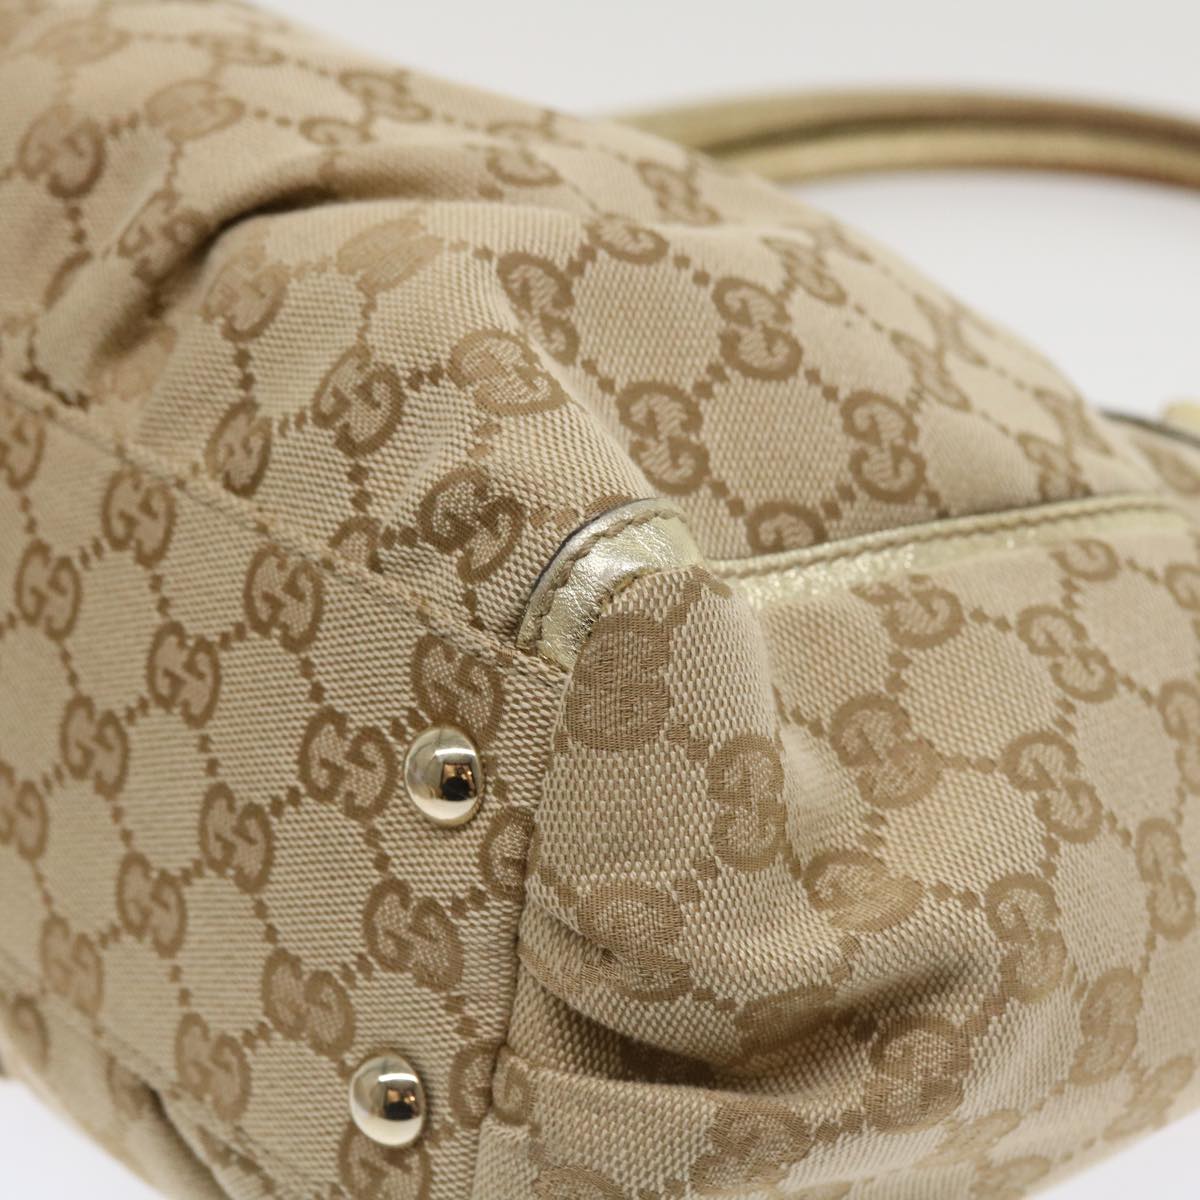 GUCCI GG Canvas Abbey Tote Bag Beige Champagne Gold 189831 Auth yk5652